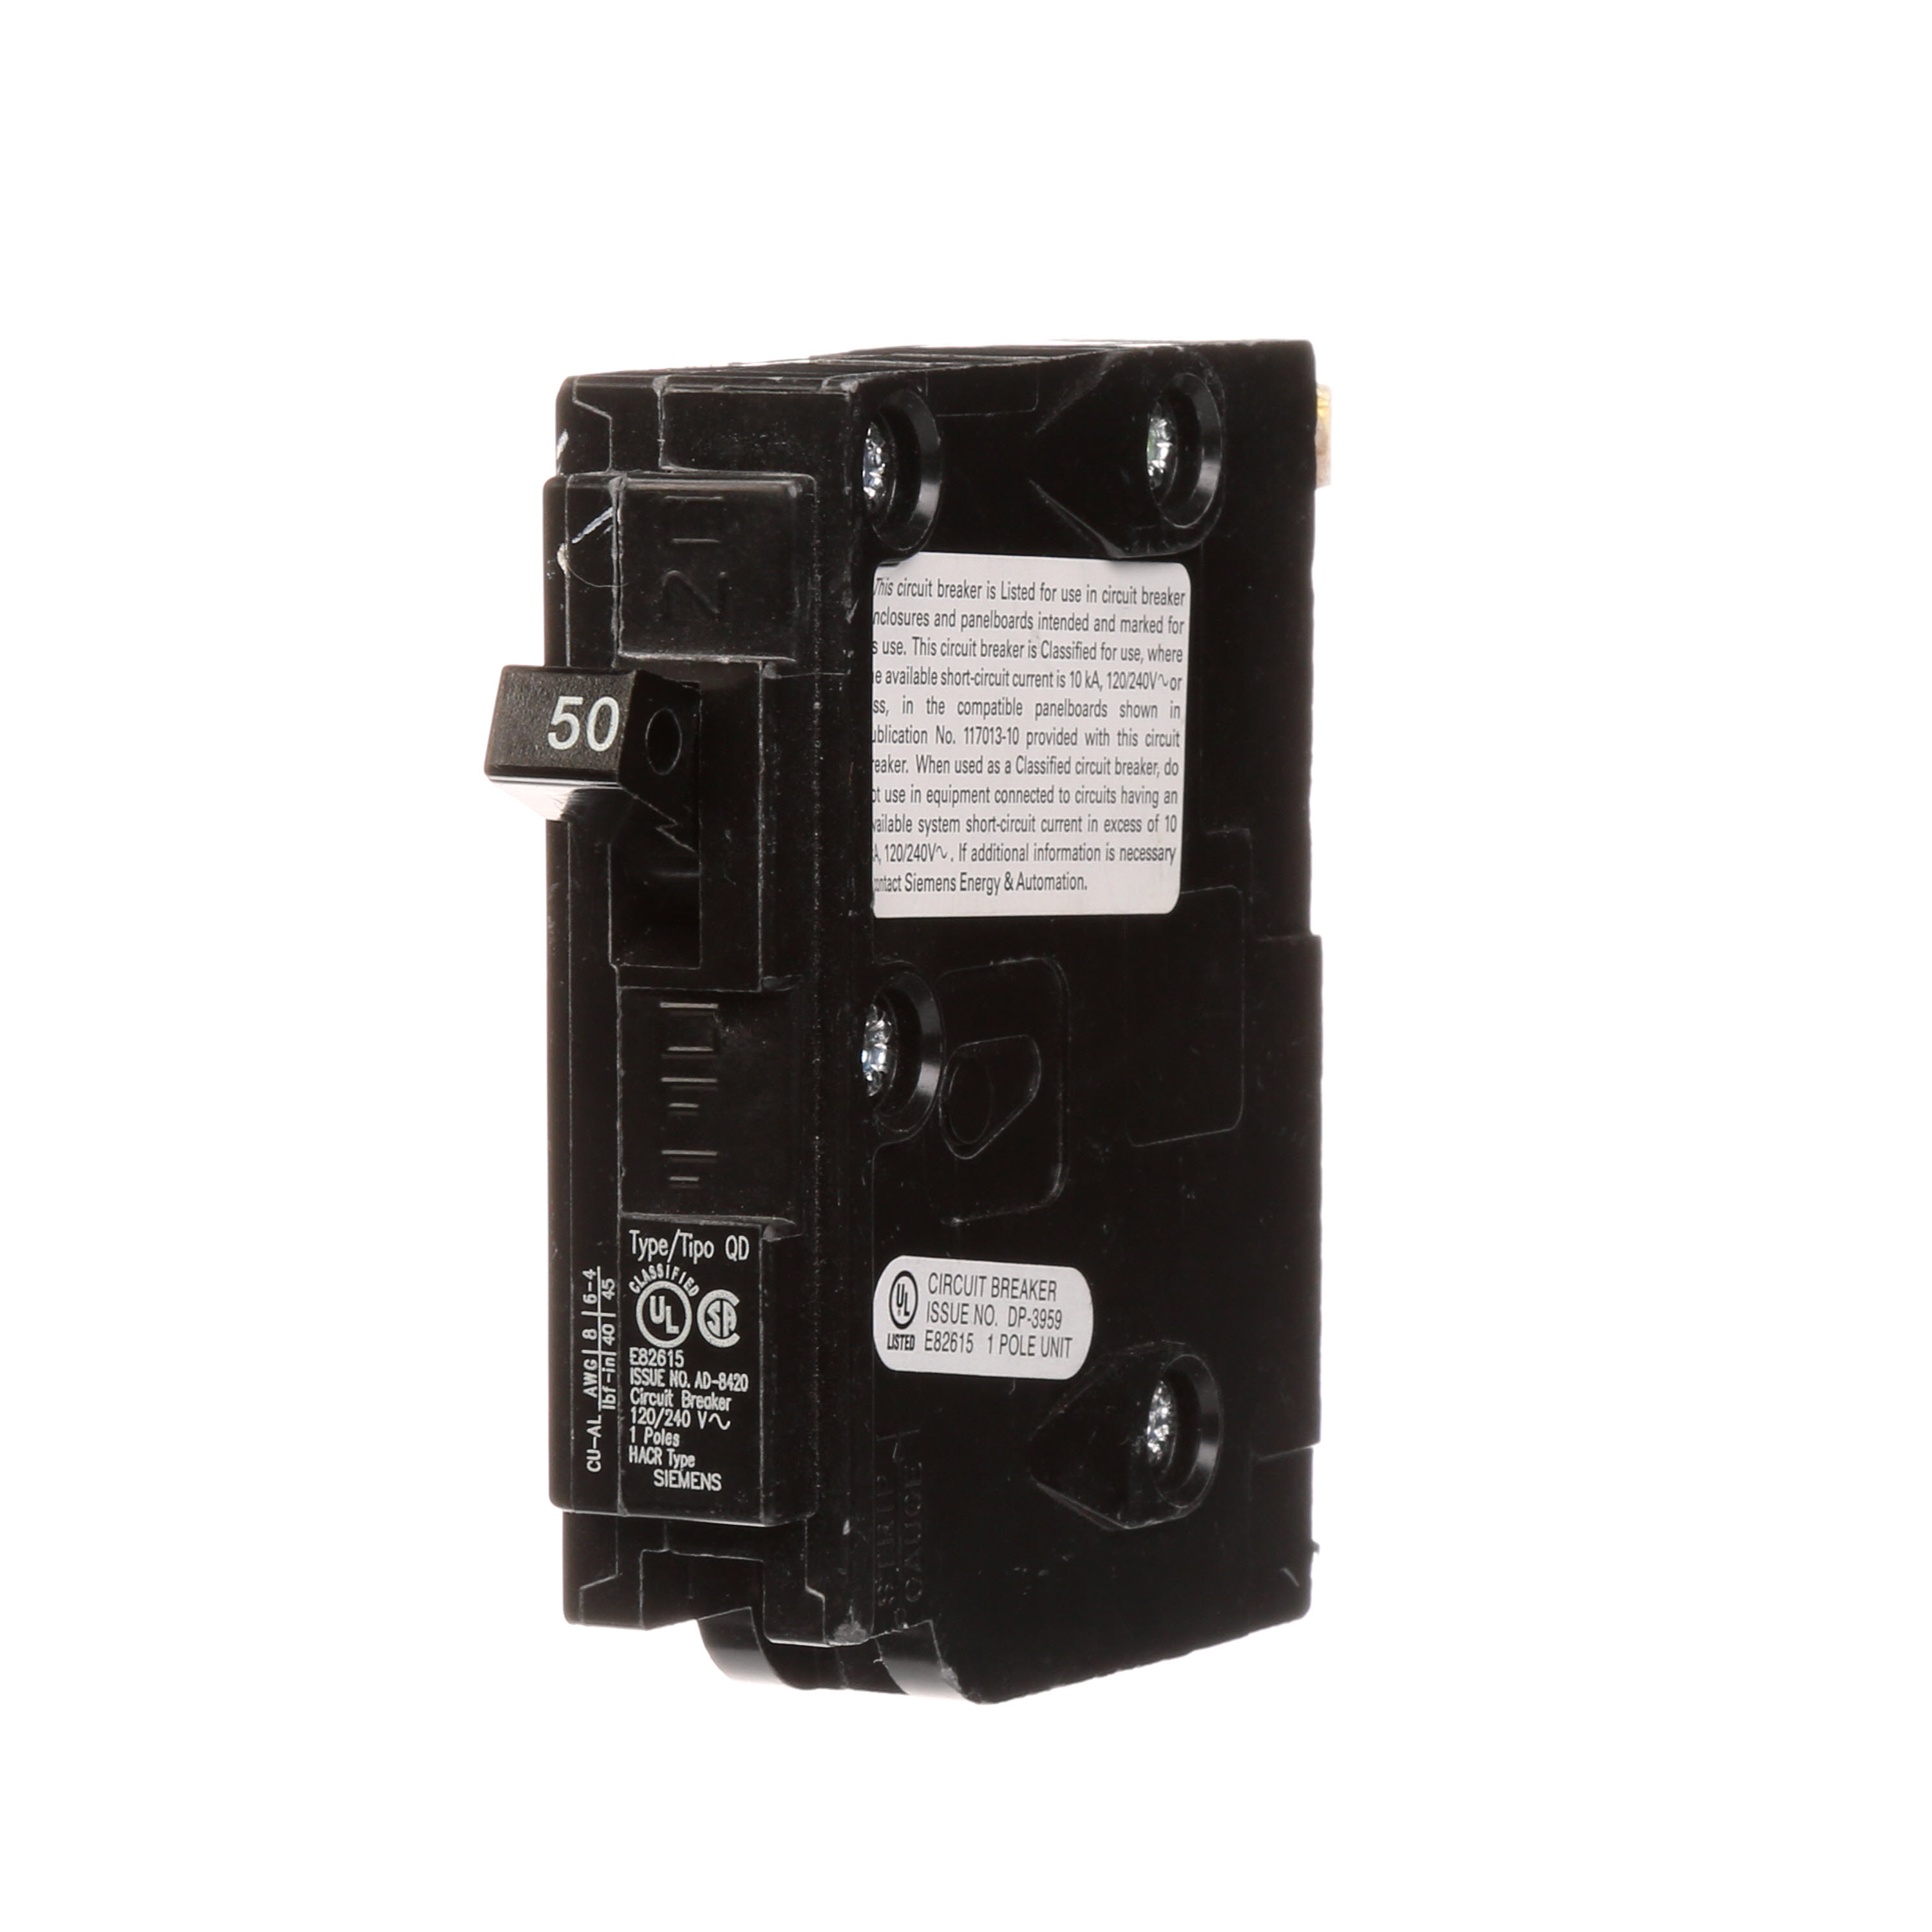 Siemens Low Voltage Residential Circuit Breakers. QD 3/4 IN Plug-In 1-Pole circuit breaker. Rated 120V (50A) AIR (10 kA). Special features HACR rated, UL listed and classified.